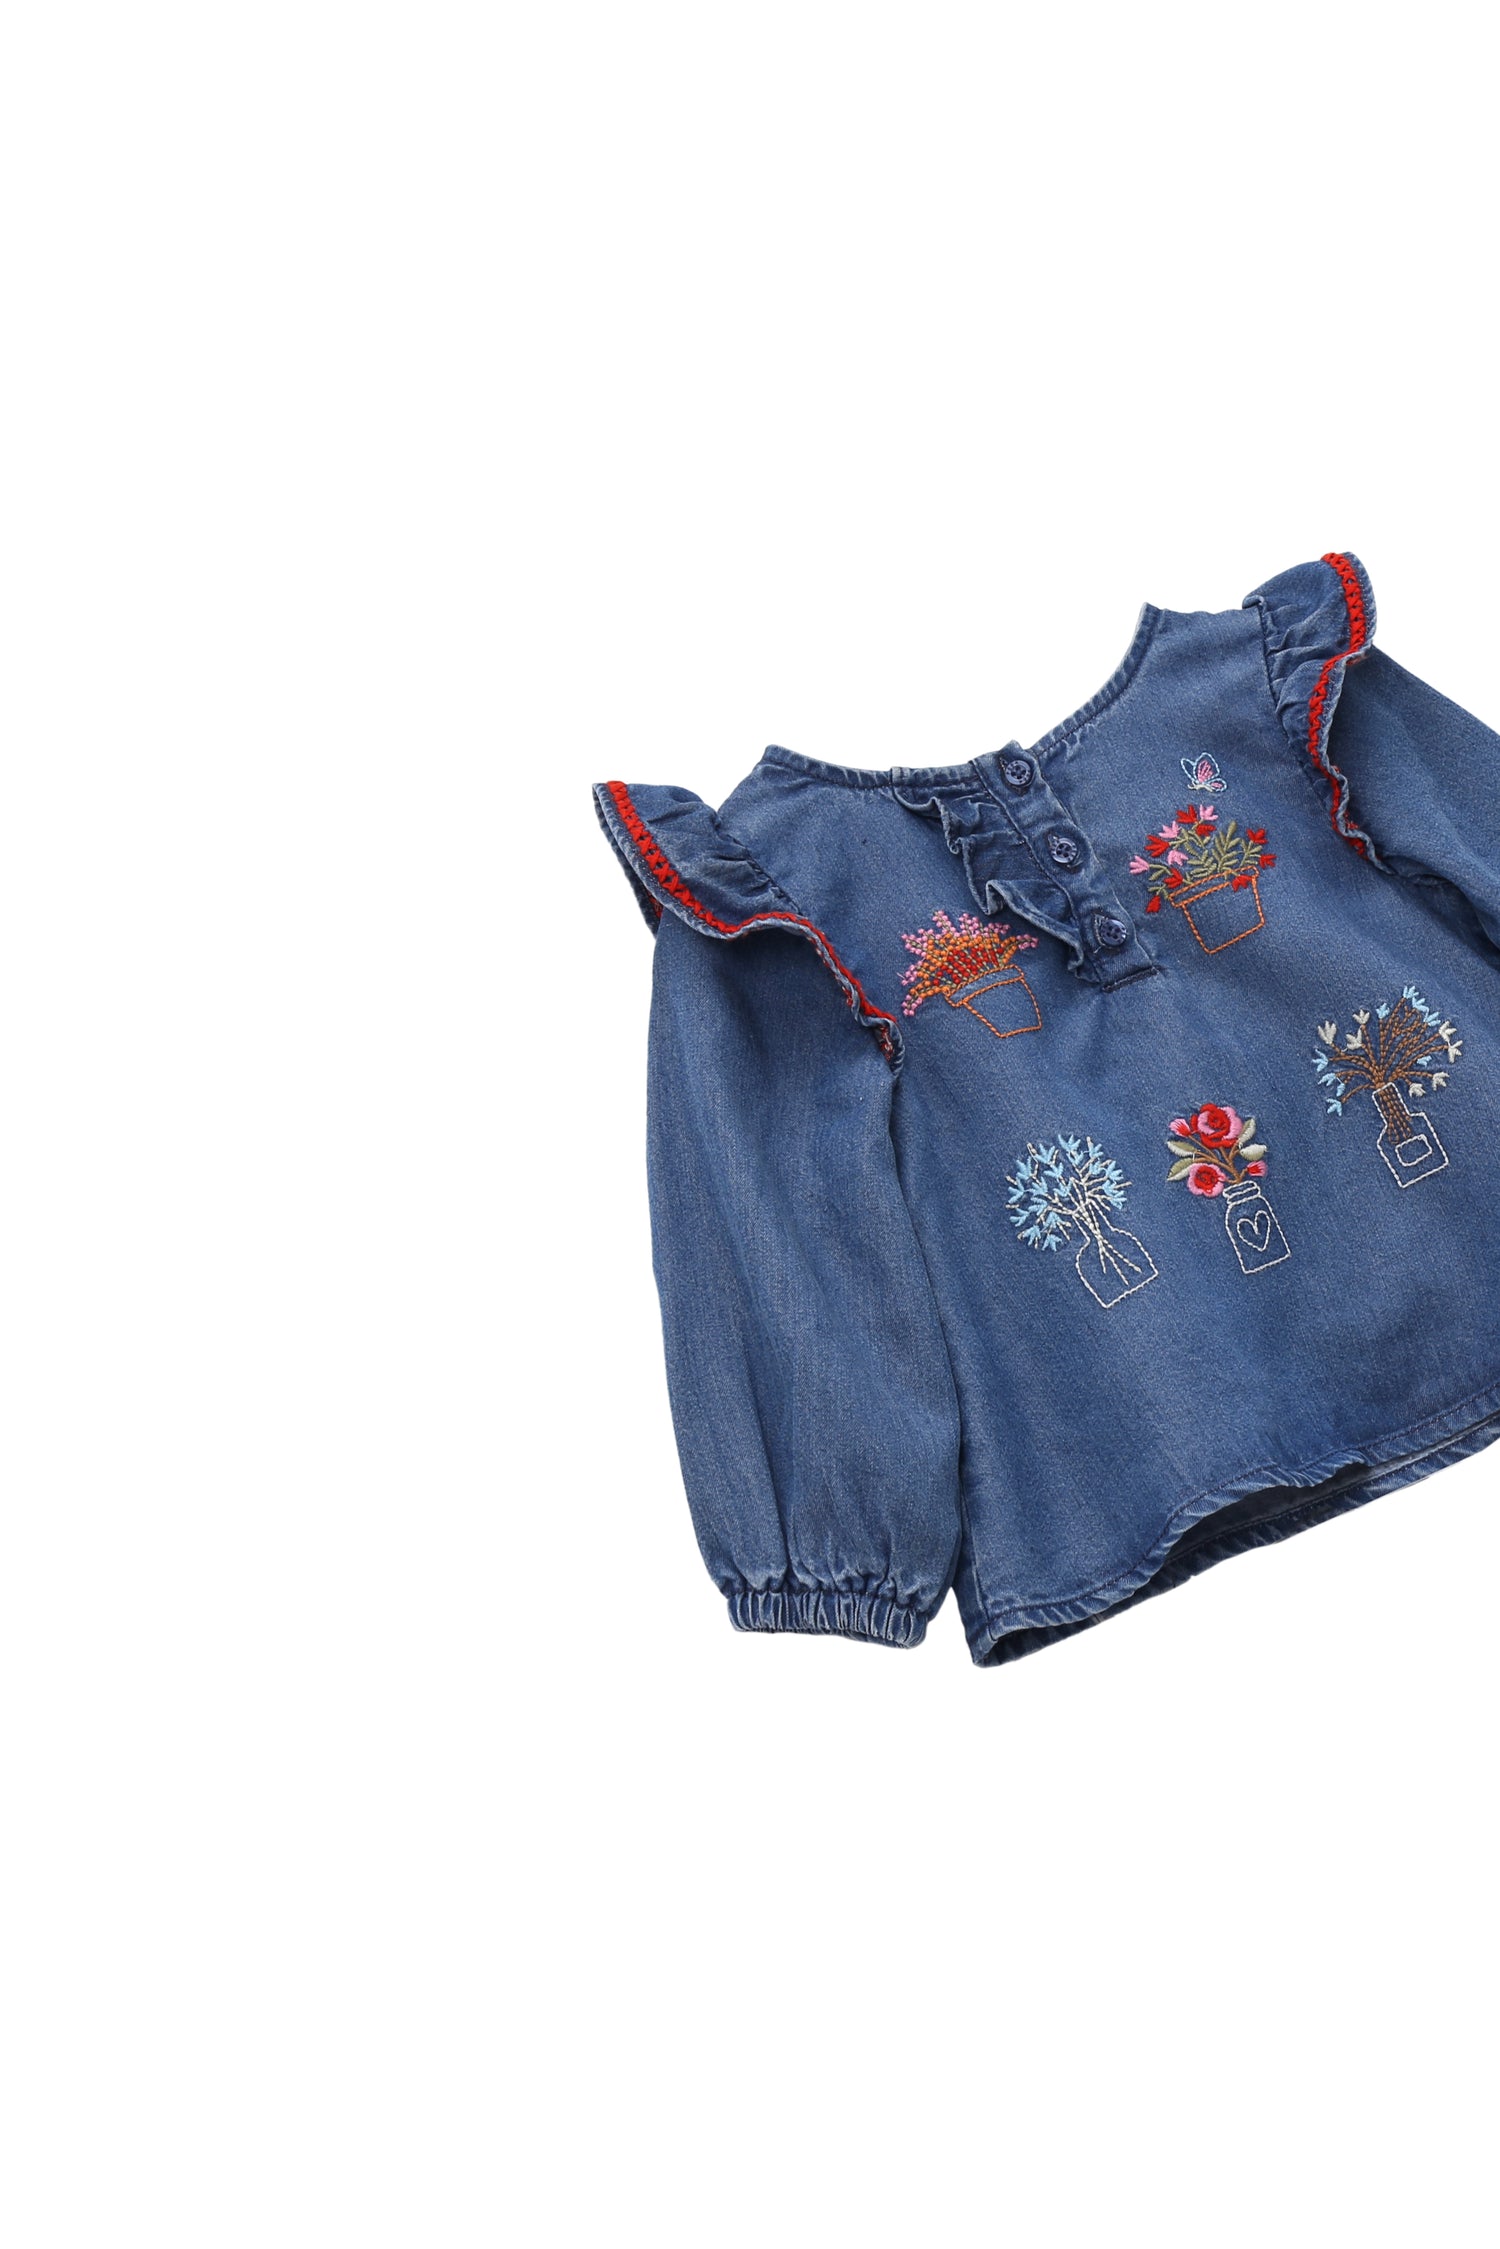 CLOSE UP OF DARK BLUE TENCEL TOP WITH EMBROIDERED POTTED PLANTS